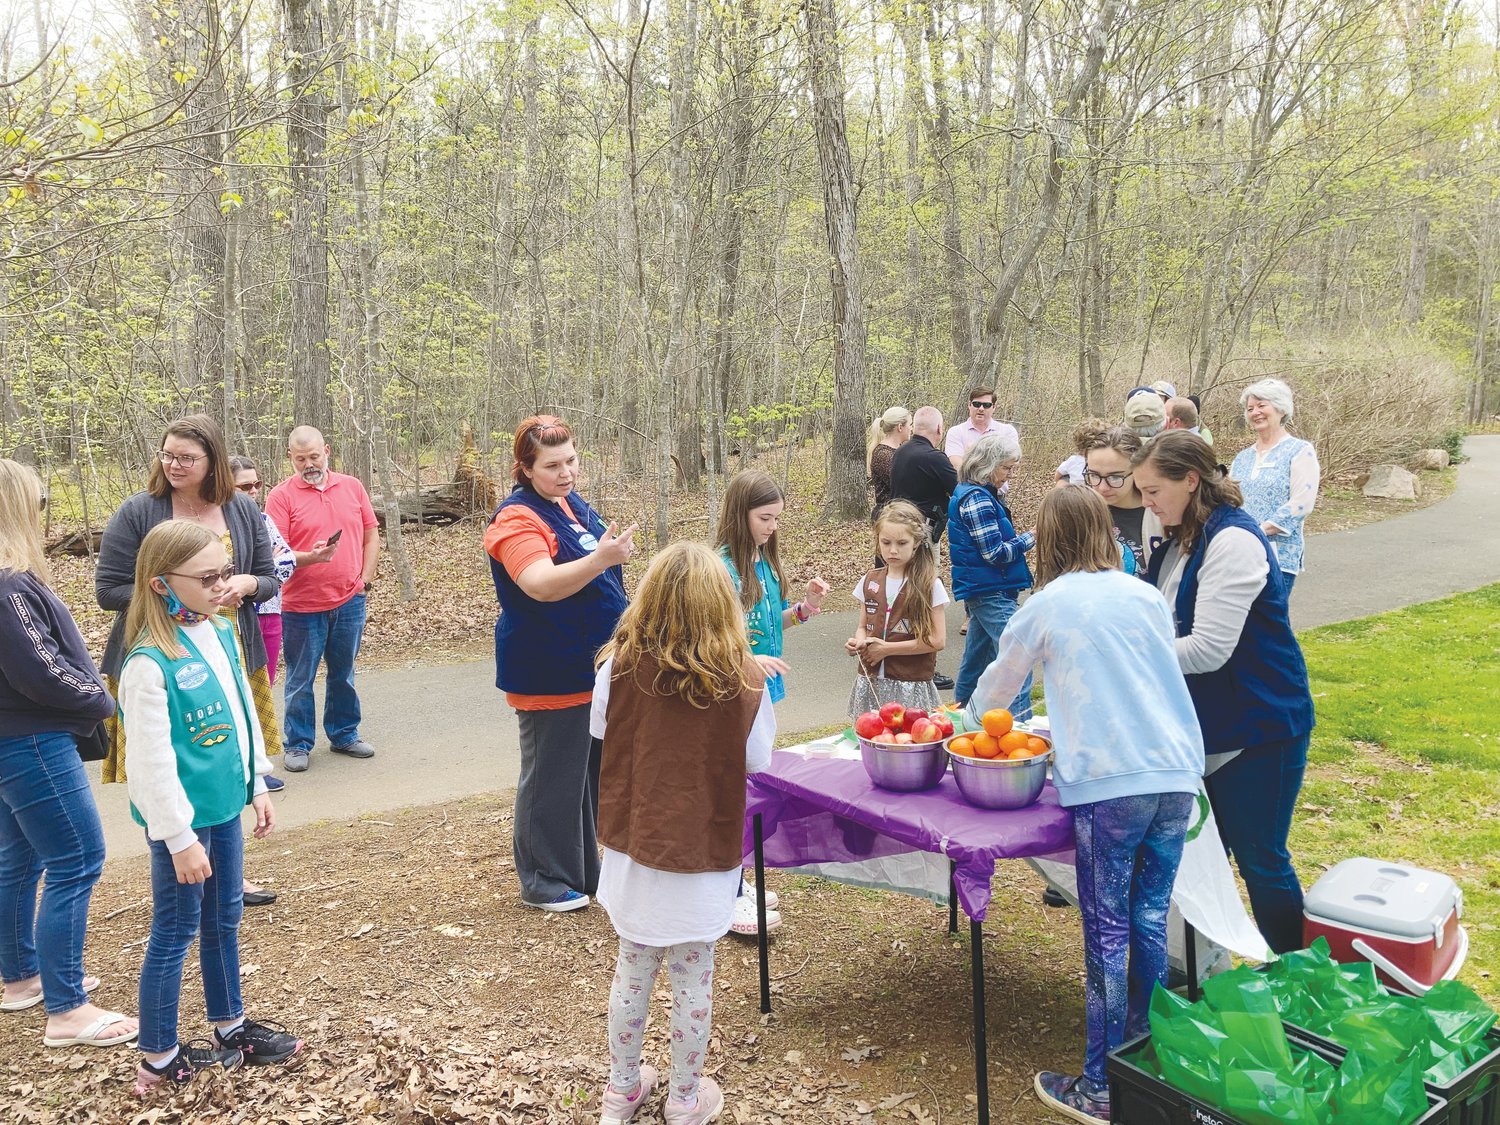 Members of Girl Scout Troop 1024 set up a table of snacks for the Pittsboro Arbor Day event.